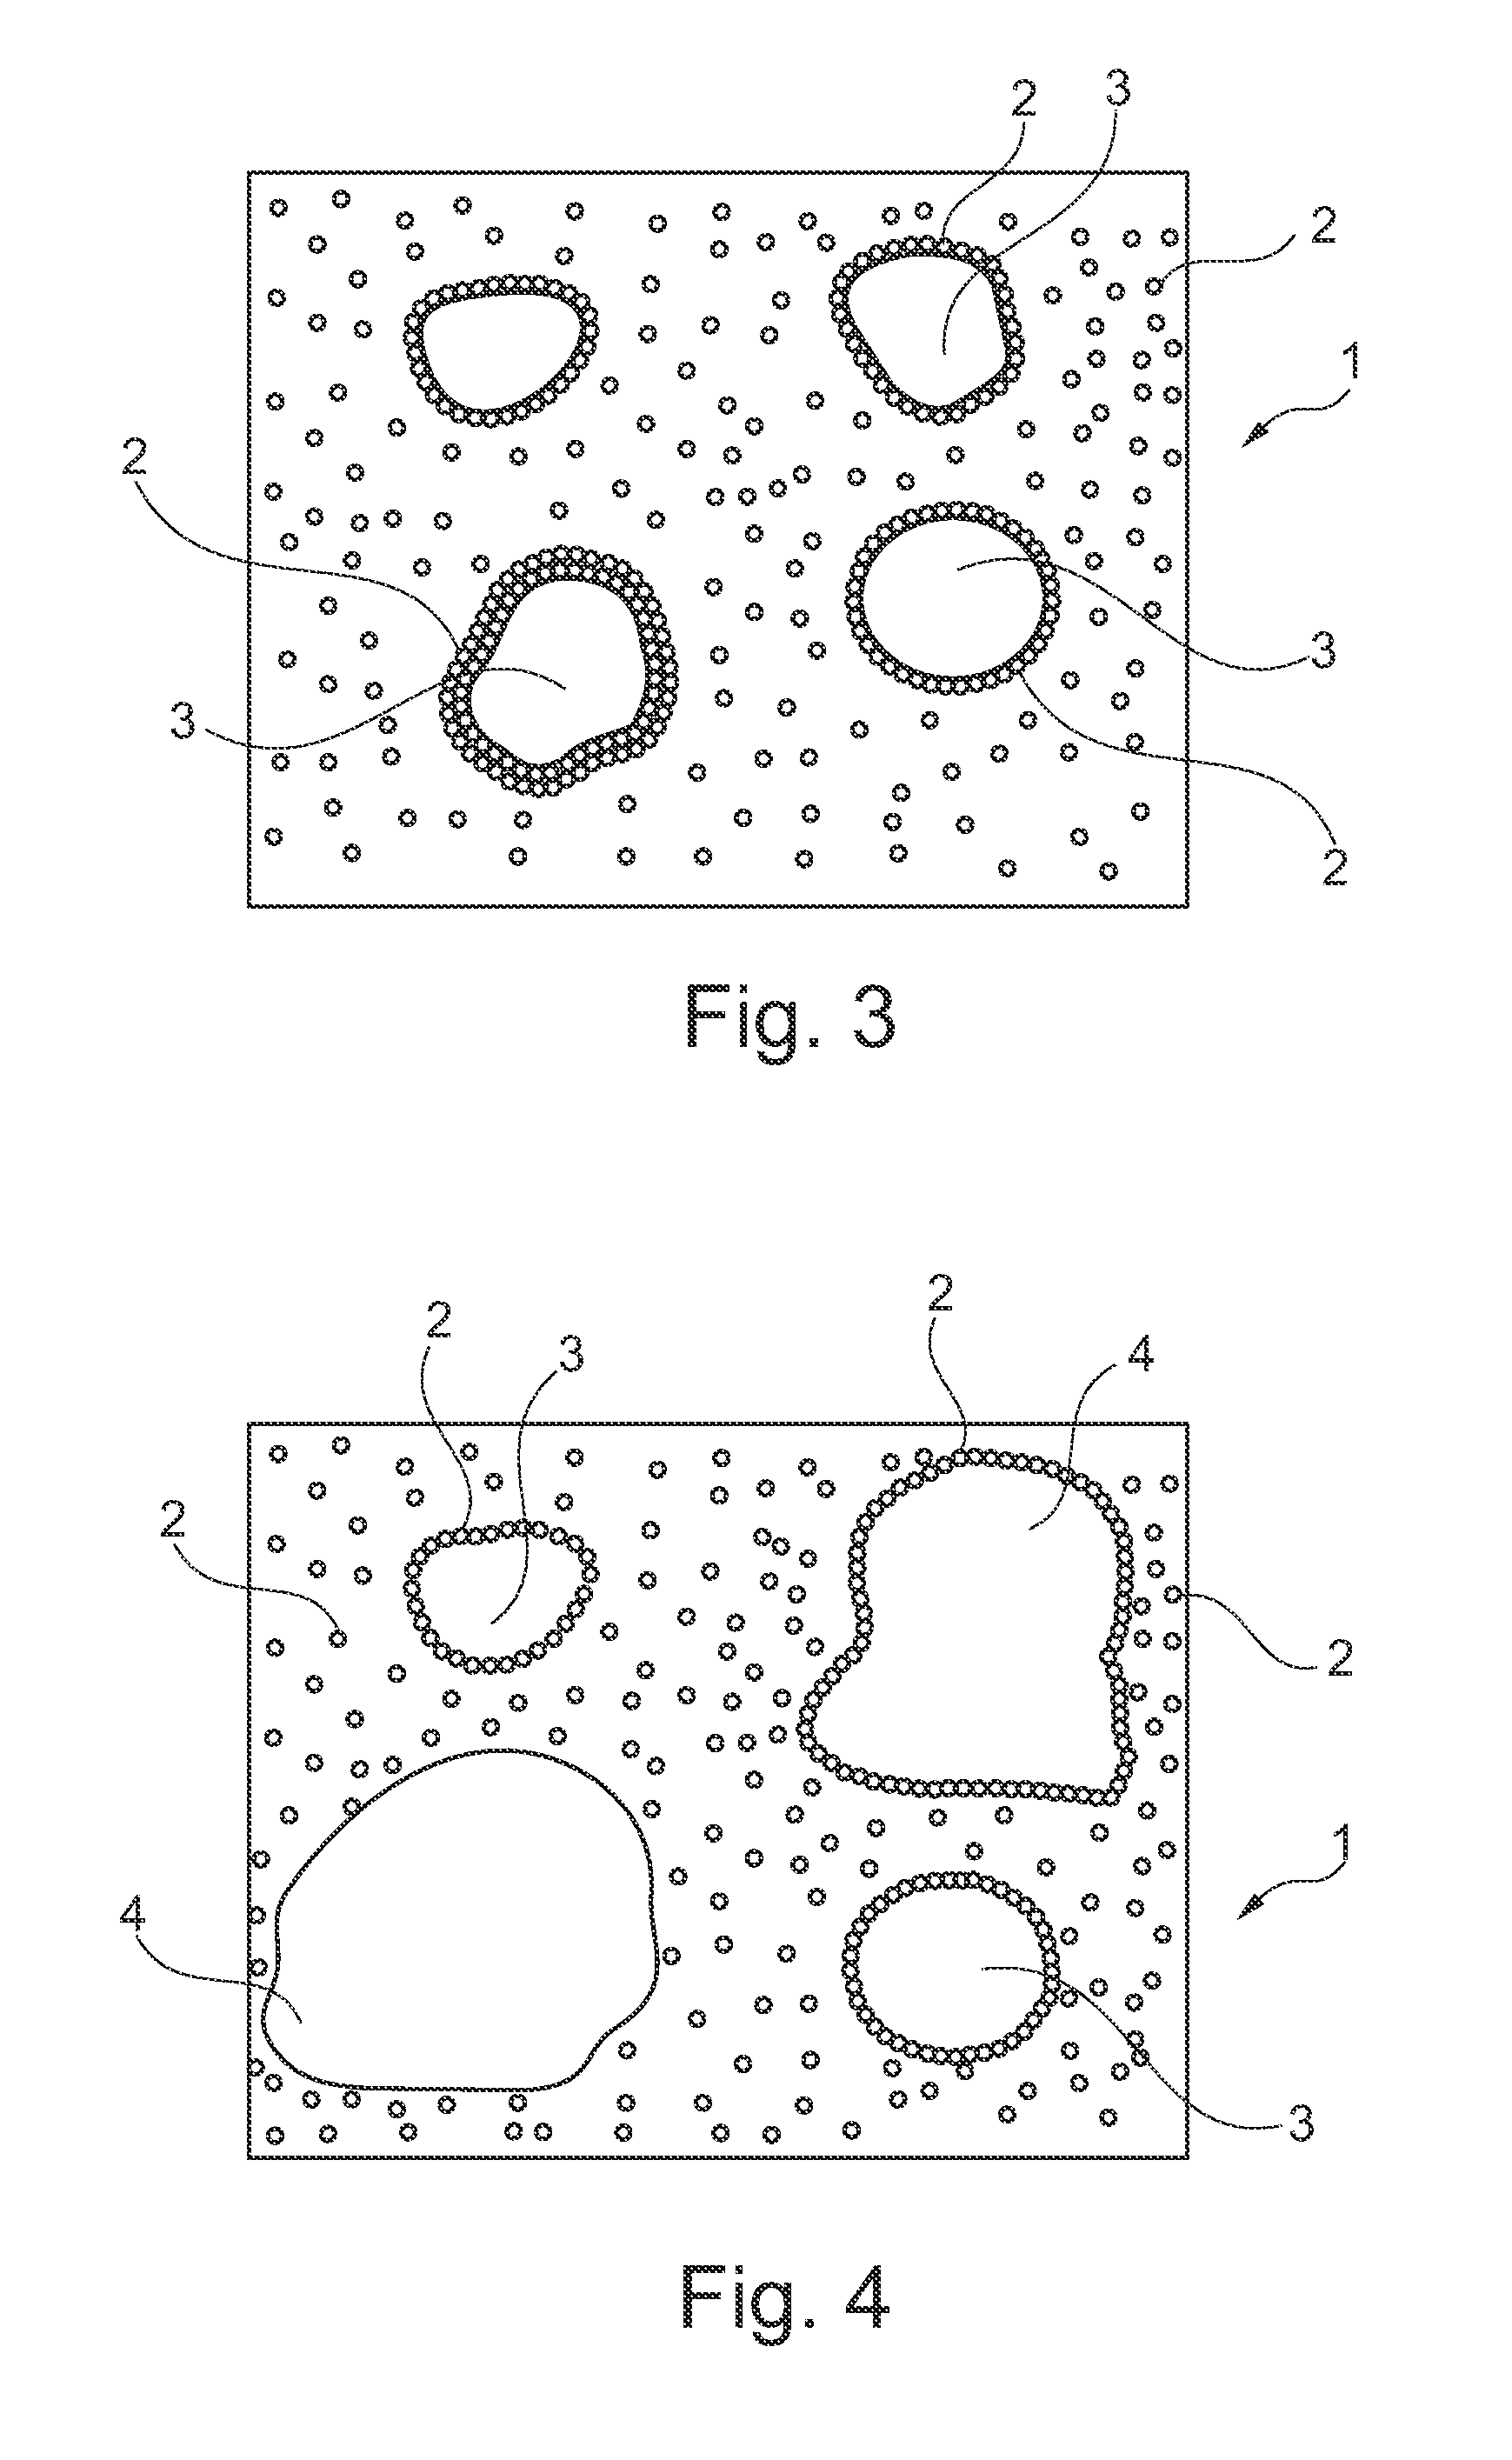 Braze alloy for high-temperature brazing and methods for repairing or producing components using a braze alloy